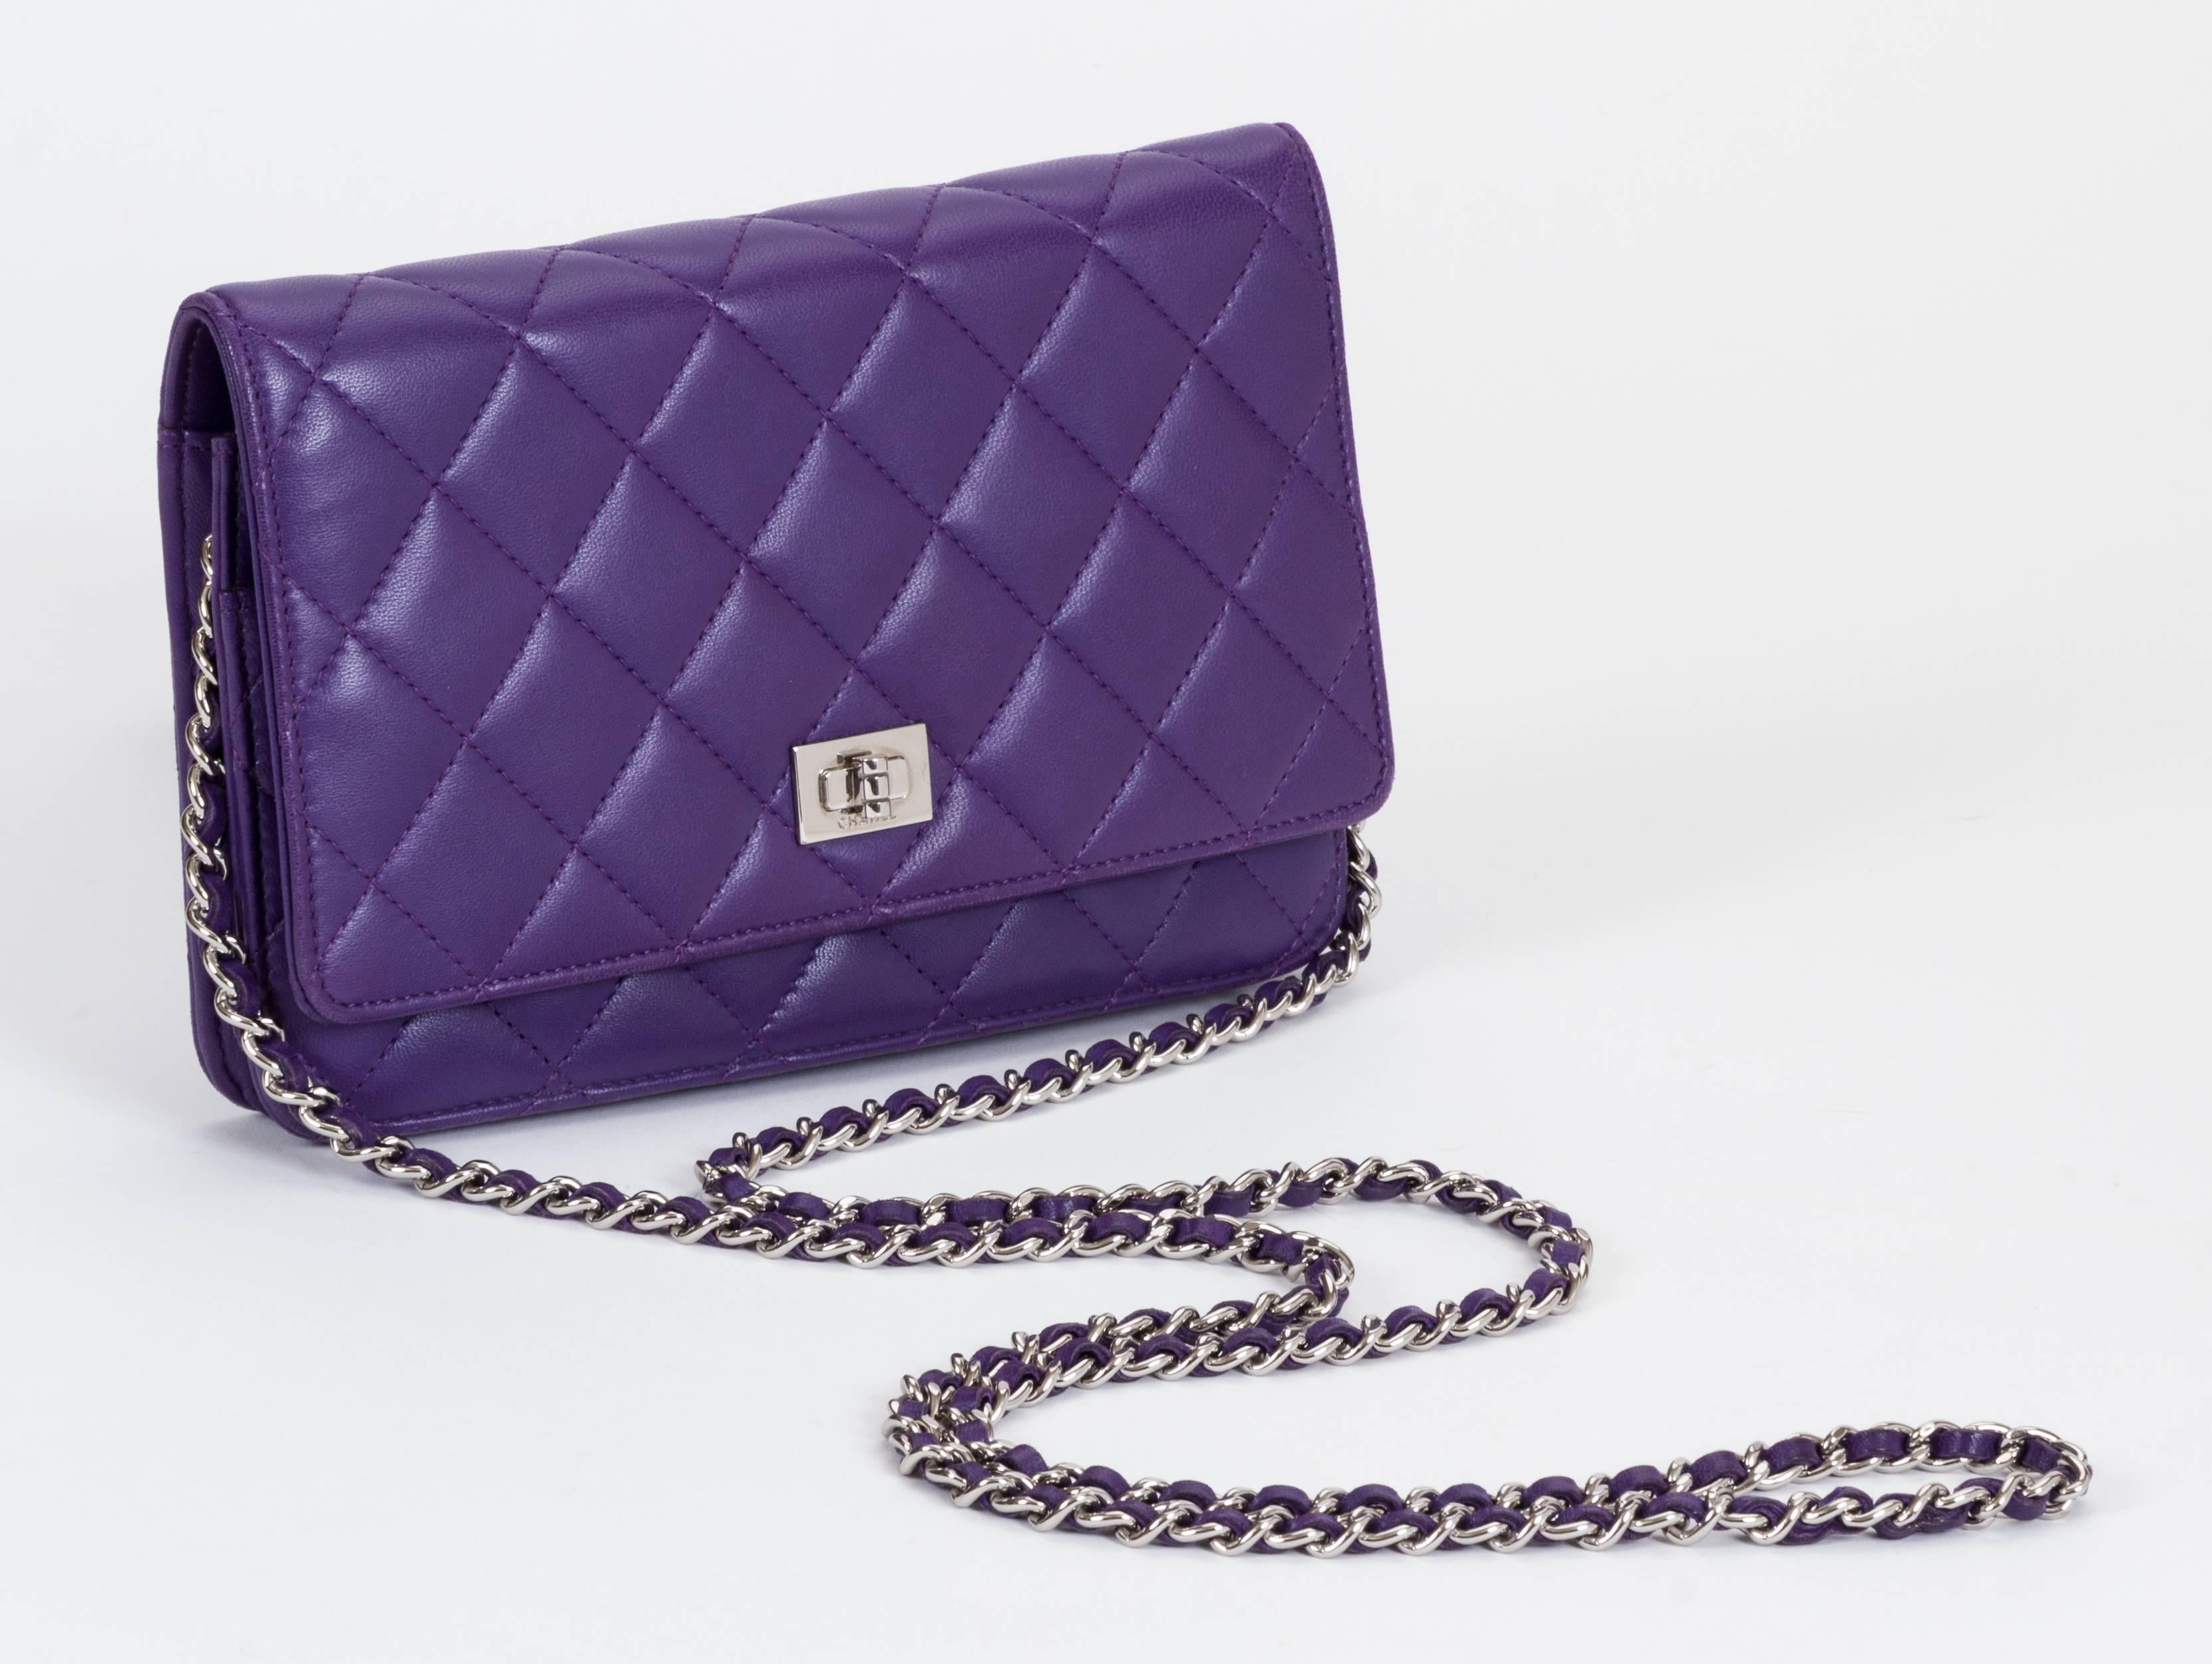 Chanel purple lambskin reissue quilted wallet on a chain with silver tone hardware. Can be worn as a clutch or as a cross body. Very good condition. Measurements 7.5